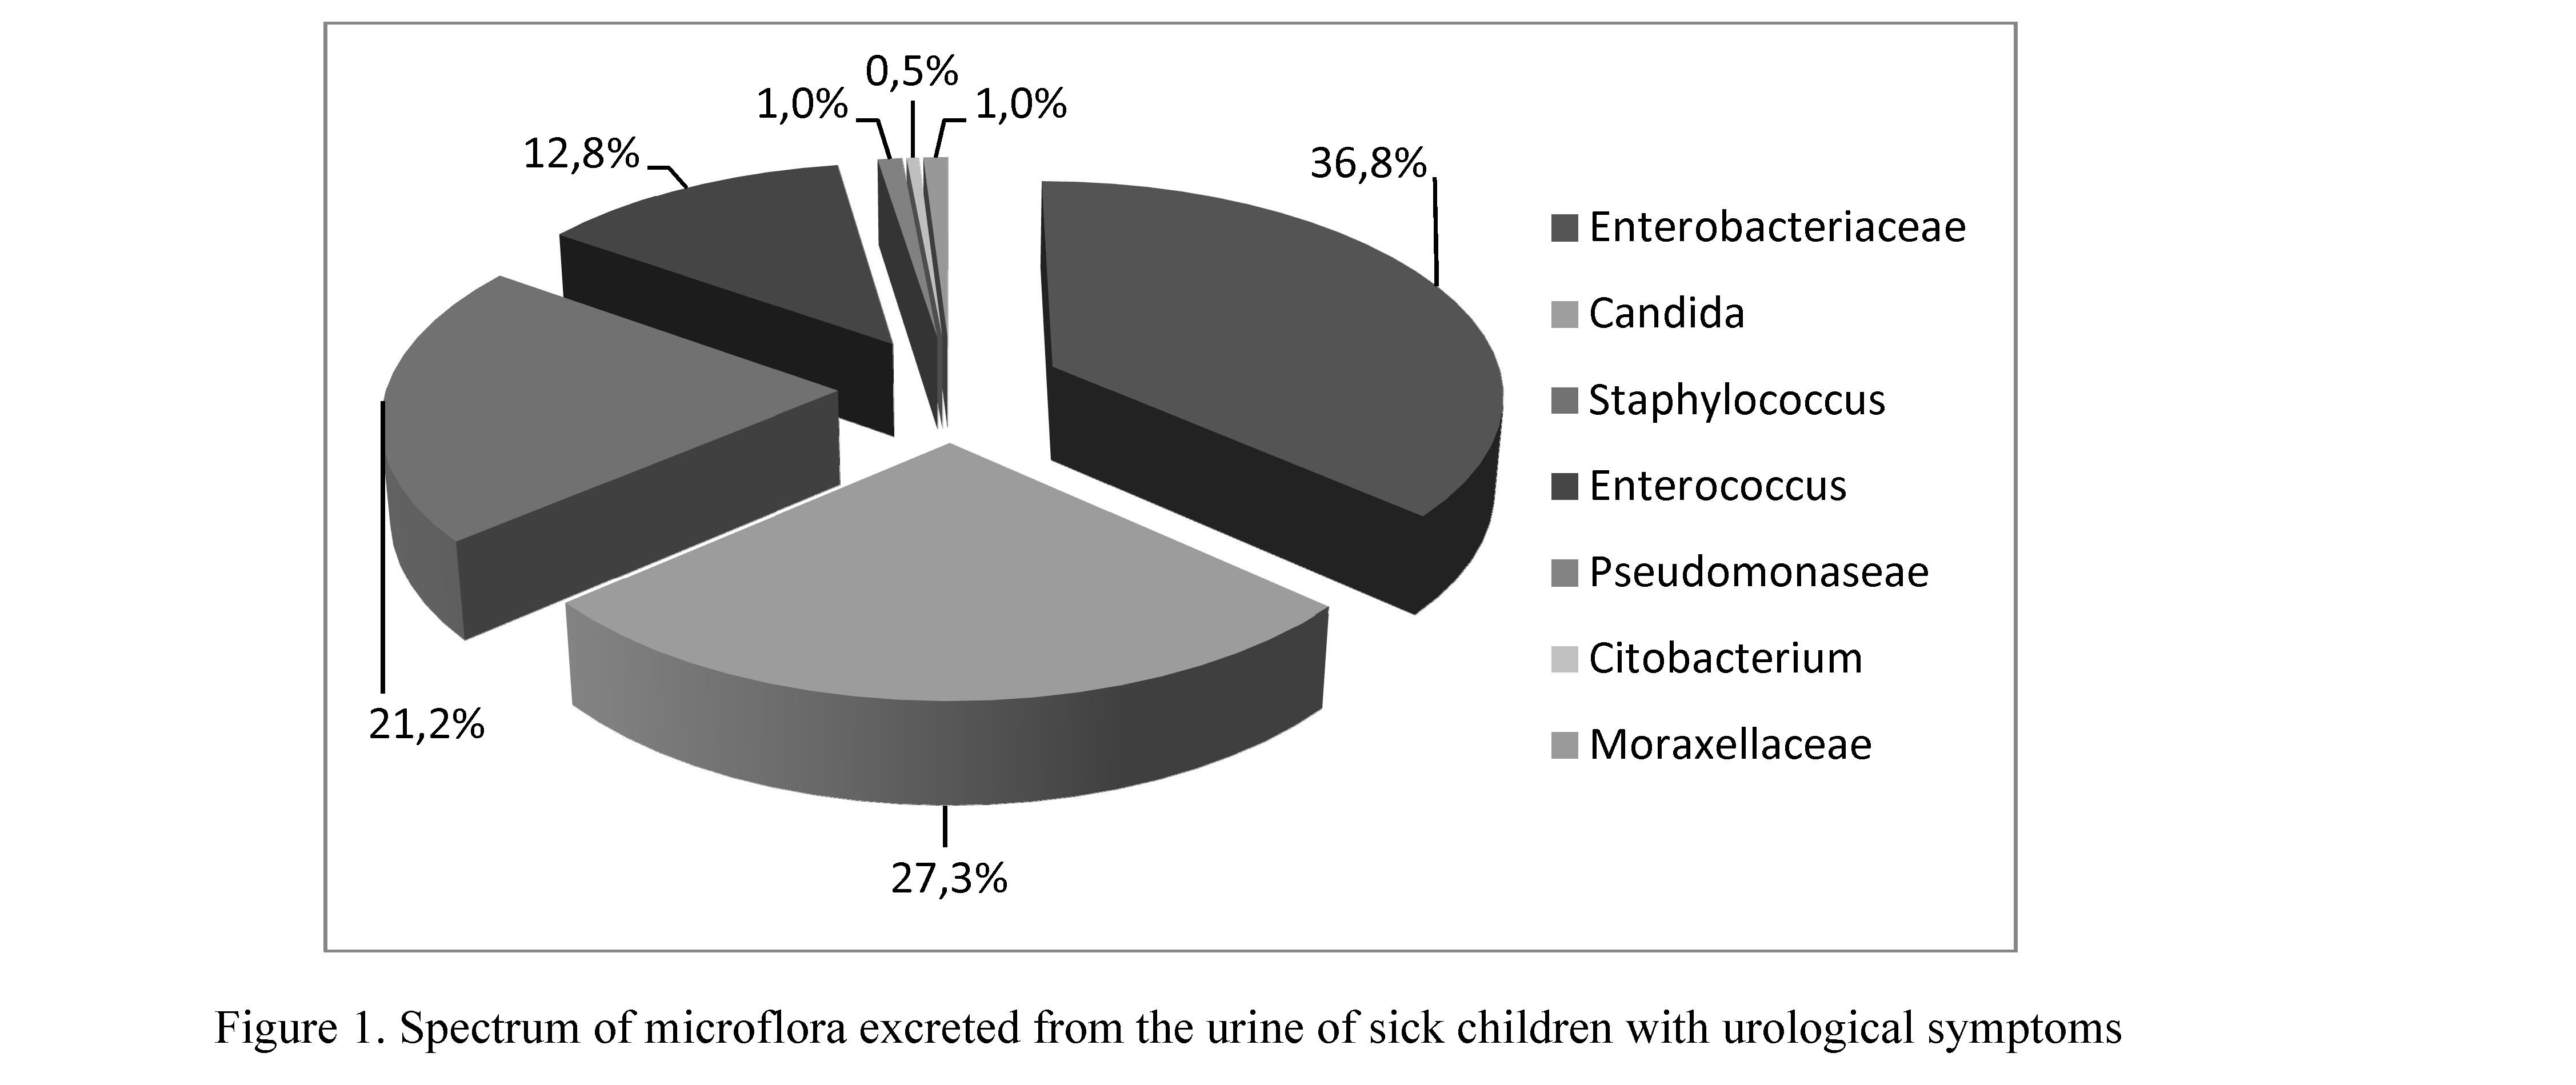 Etiological structure of infectious agents in the urinary tract among children